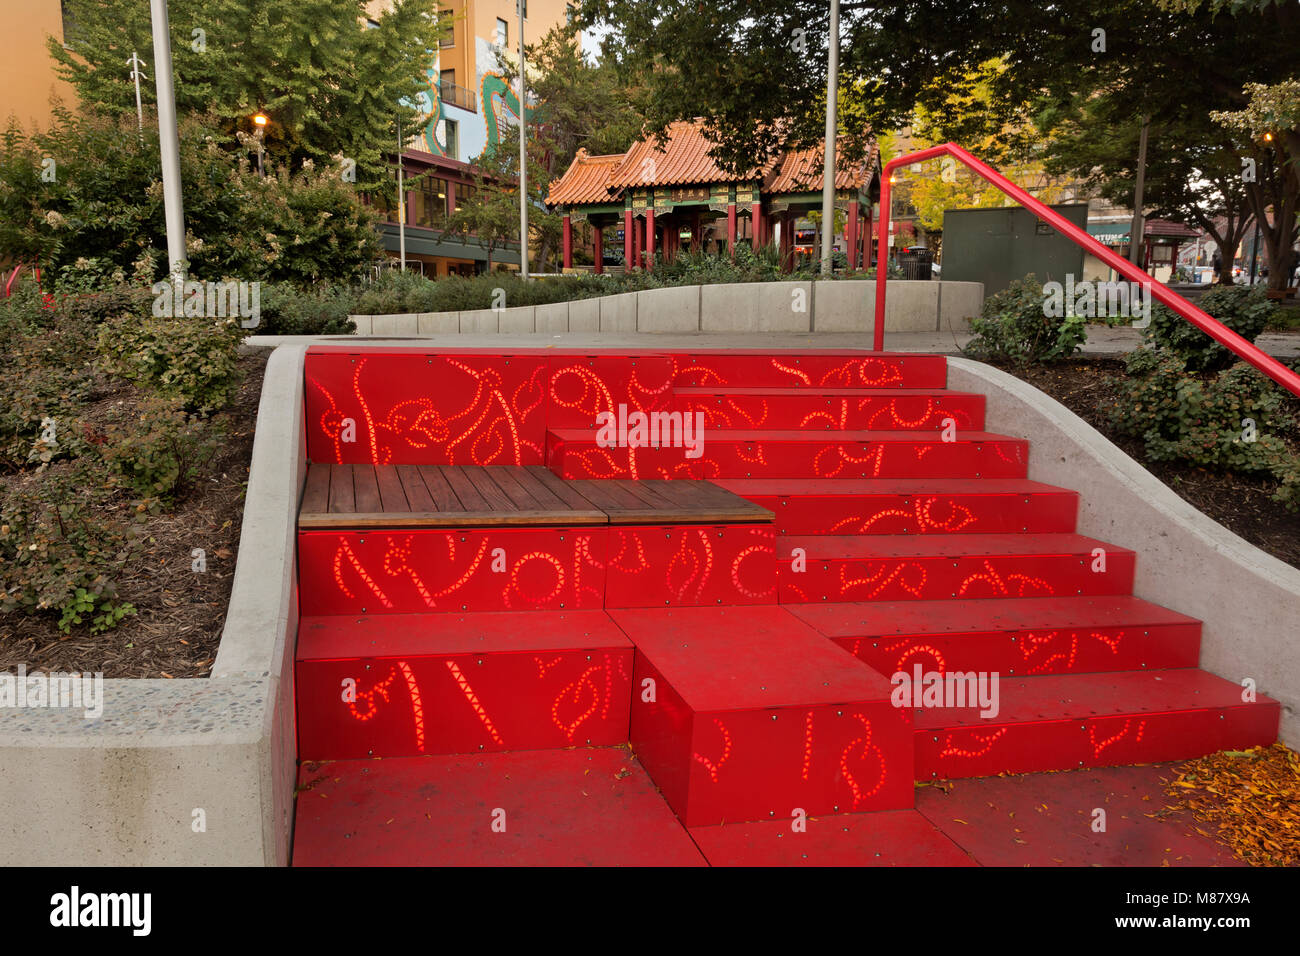 WA13846-00...WASHINGTON - Light sculptured steps honoring the monkey and the Grand Pavilion at Hing Hay Park in the International District of Seattle. Stock Photo